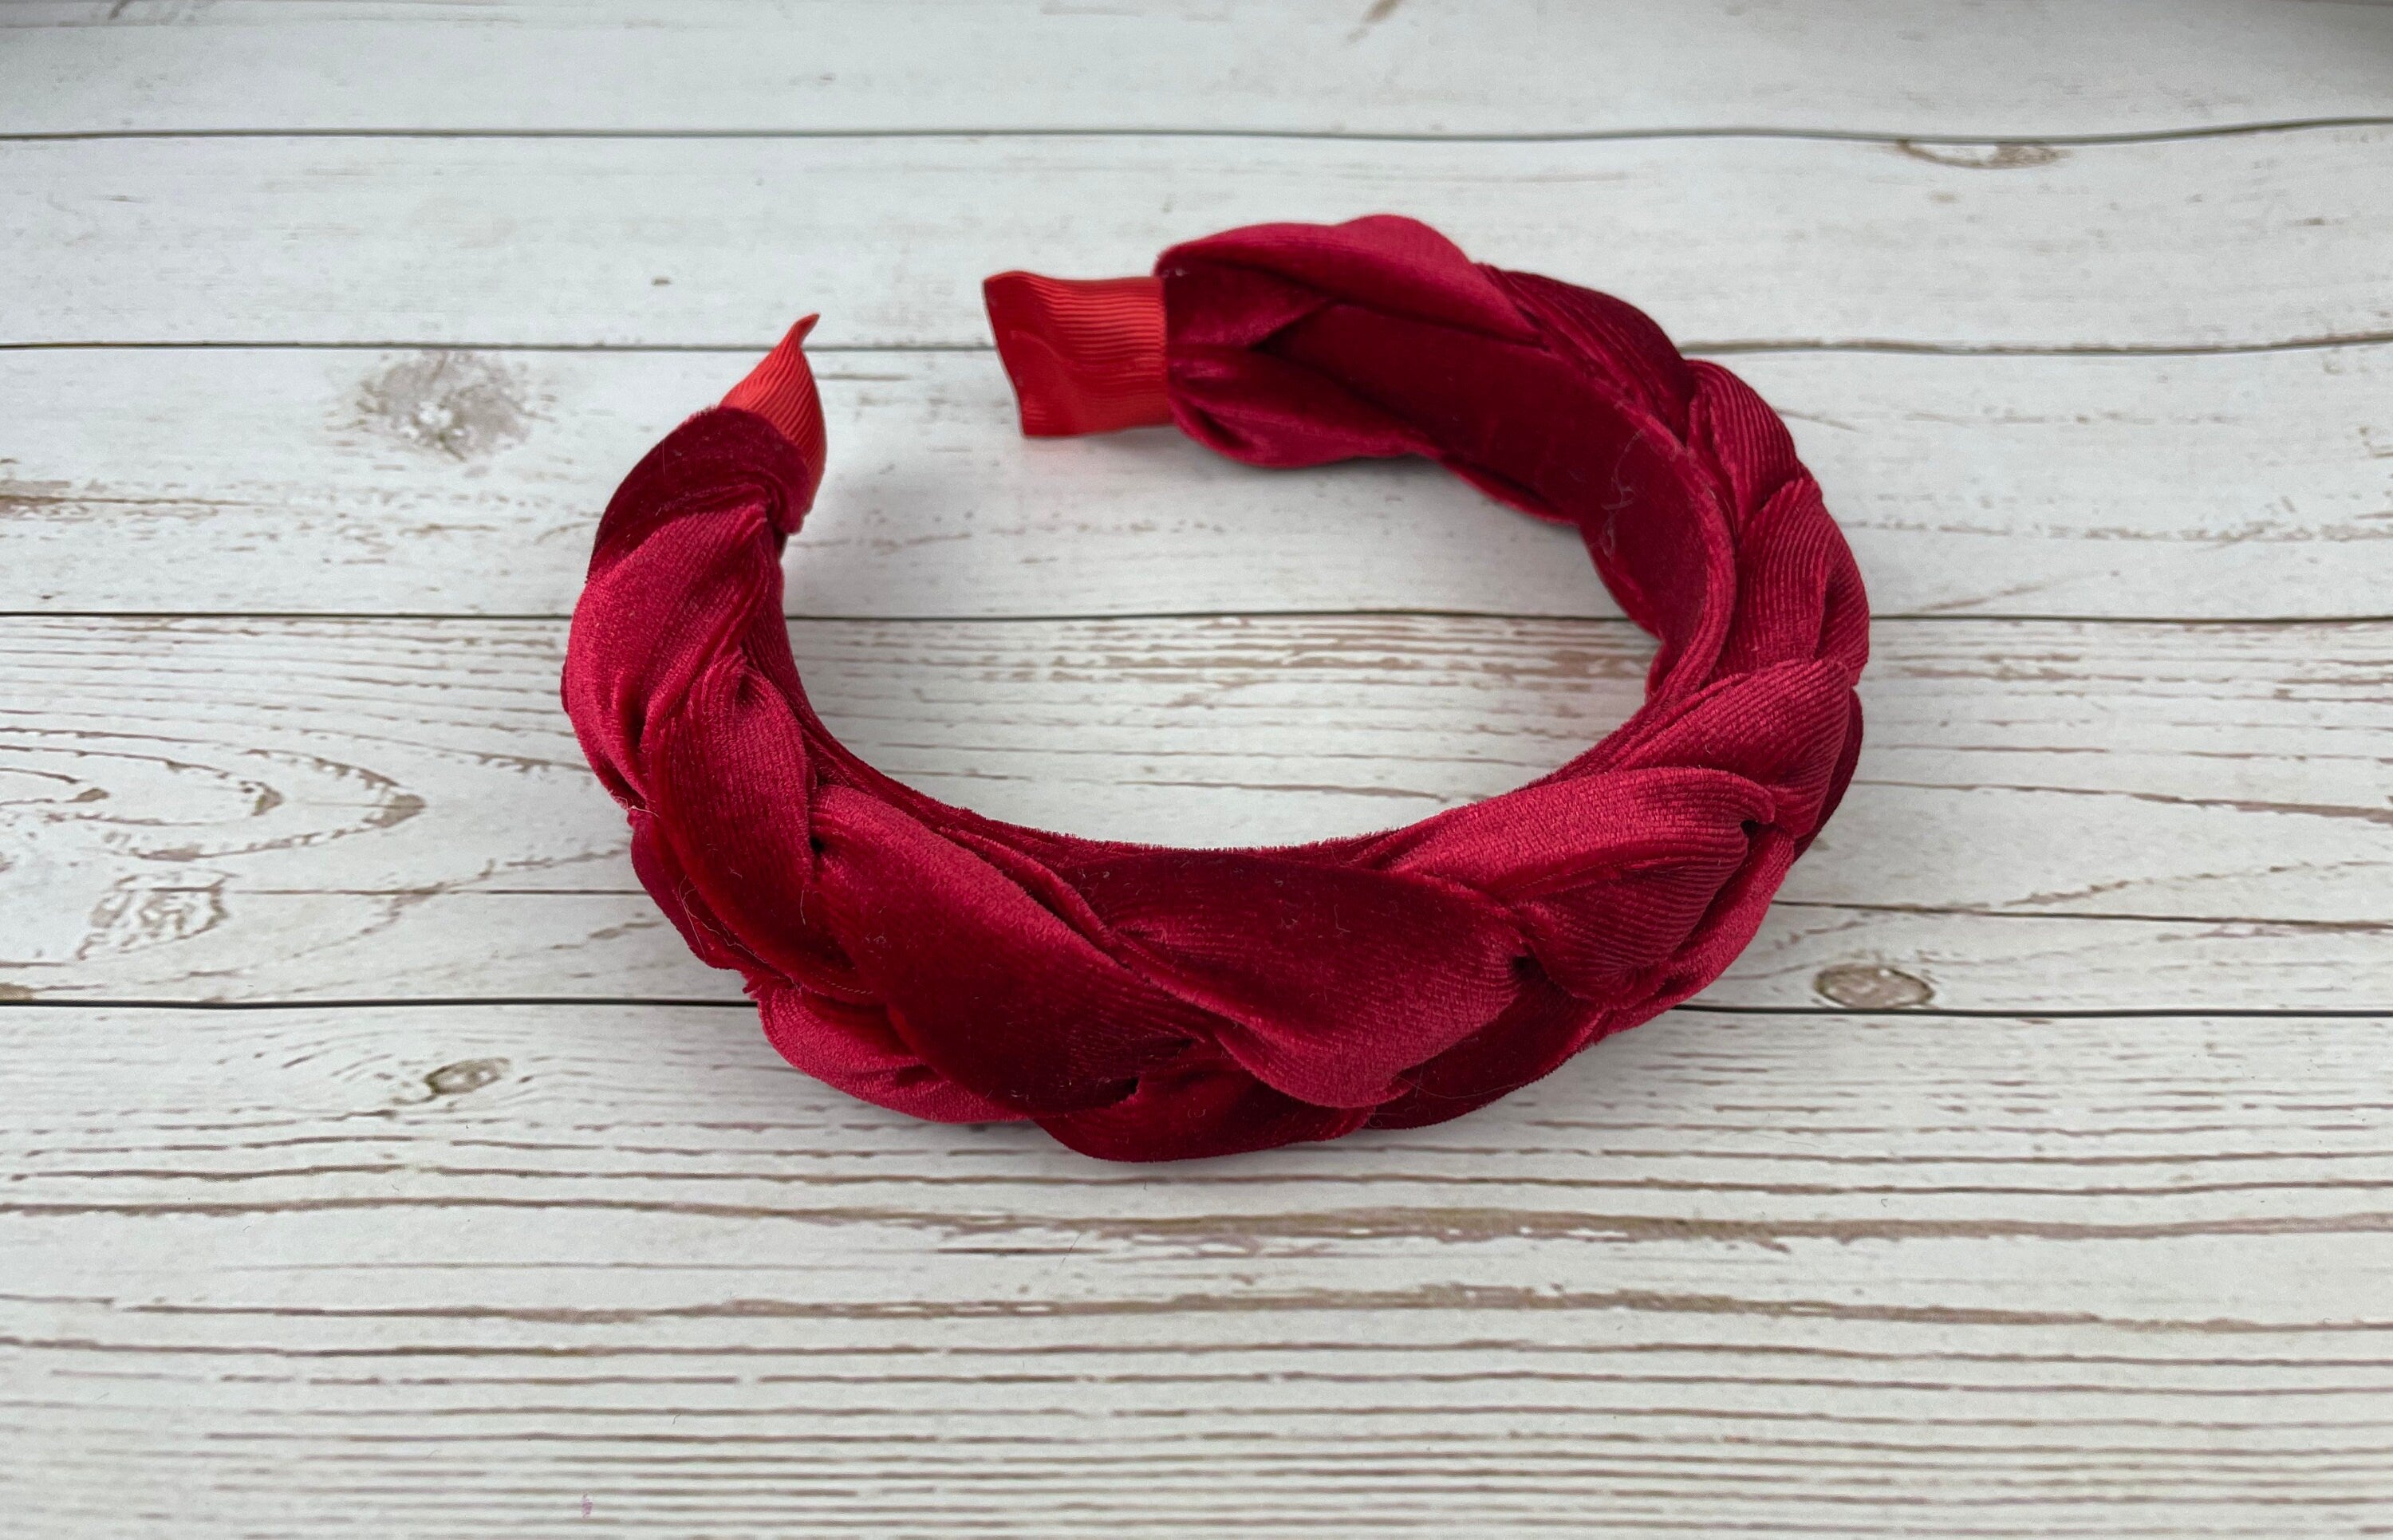 Looking for a unique gift for her? Our Red Velvet Braided Headband is a perfect choice! With its padded design and on-trend braided look, this accessory will elevate any outfit. Shop now on Etsy.